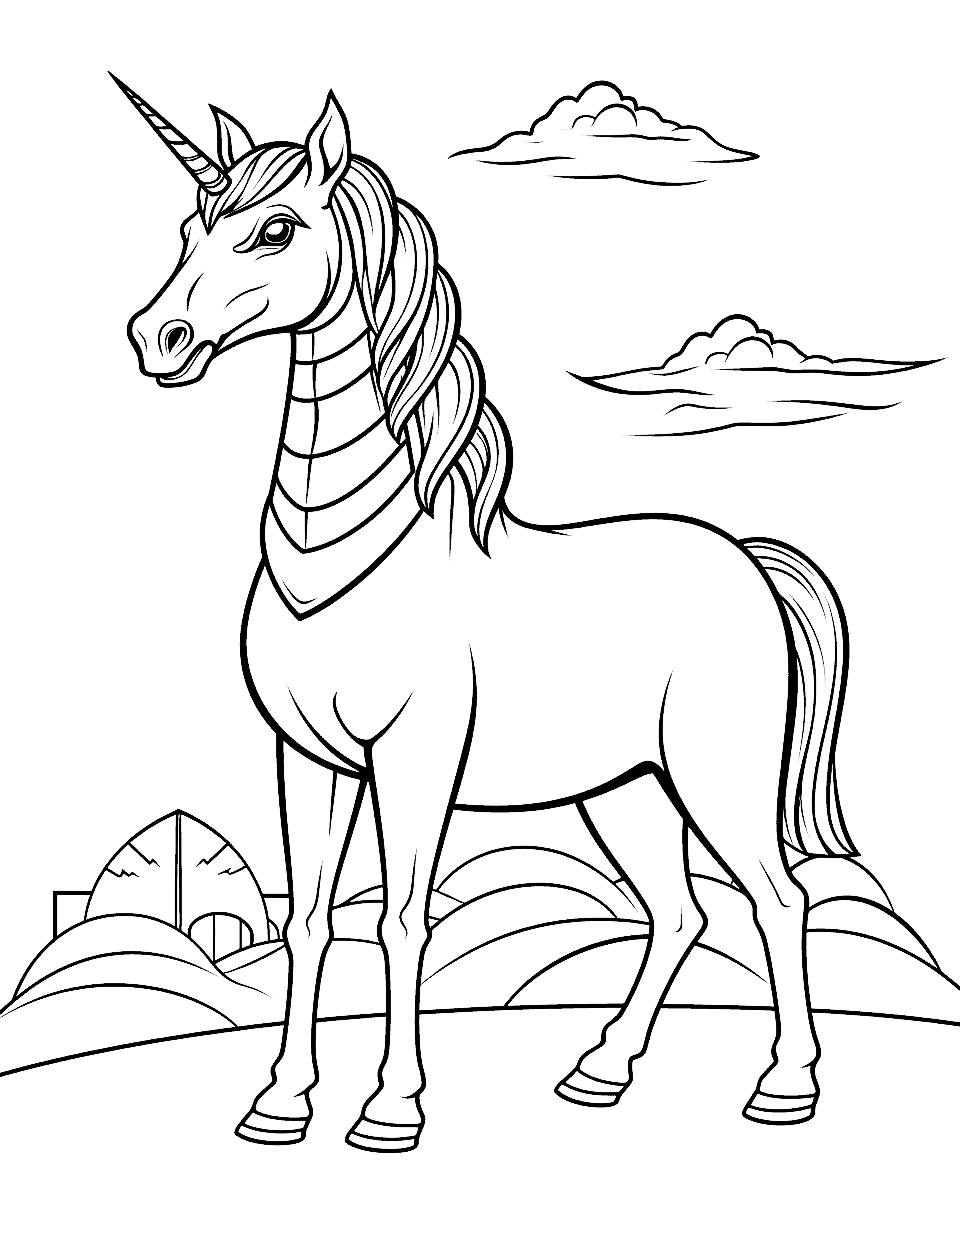 Egyptian Unicorn Coloring Page - A unicorn with an Egyptian-style collar standing in a desert.